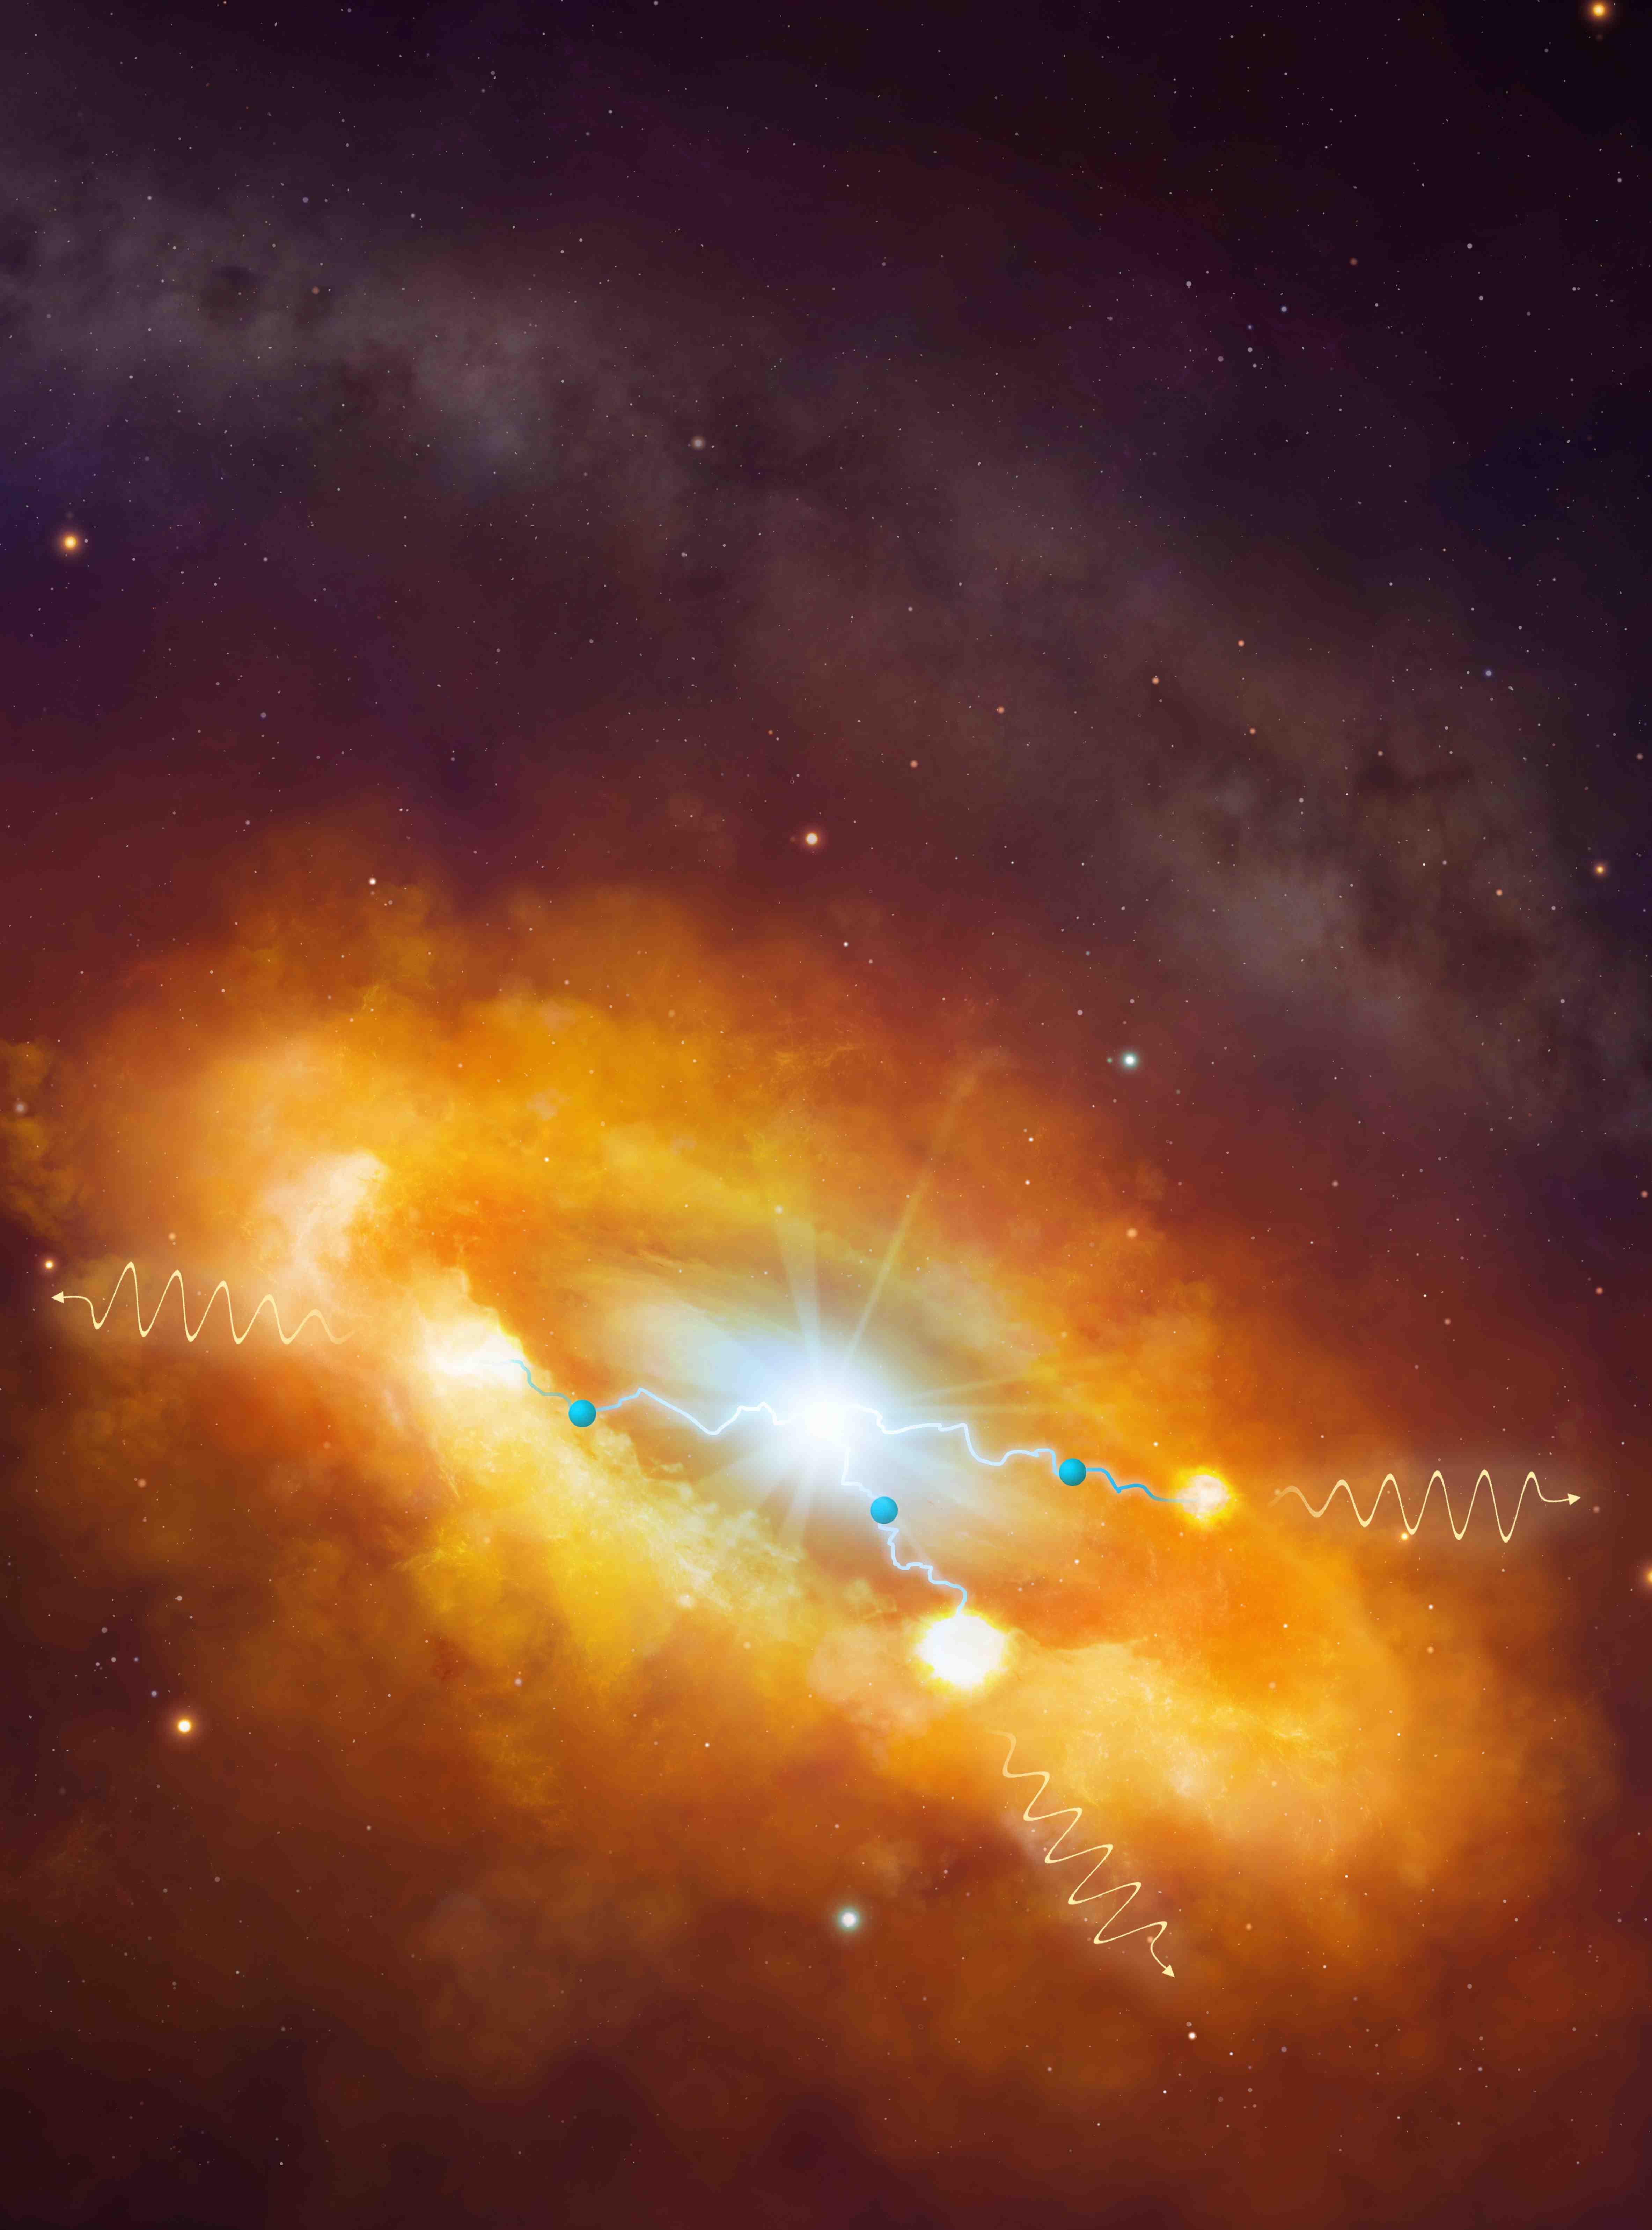 Artwork of an active galactic nucleus, or AGN. Many, perhaps most large galaxies, are thought to harbour supermassive black holes in their central regions. These enormous gravitational powerhouses can weigh anything from a few hundred thousand to several billion times the mass of a normal star. In some galaxies, such as our own Milky Way, these black holes may be dormant. But in active galaxies such as quasars and Seyfert galaxies, those with unusually bright central regions, the black hole is probably feeding off a vast accretion disc - a donut-shaped gas cloud. The gas in the disc spirals around and is heated to extremely high temperatures by friction, before falling into the hole. In some cases, magnetic fields thread the disc, and lead to the formation of beams of charged particles, which are expelled at great velocities, approaching light speed, along the rotation axis.